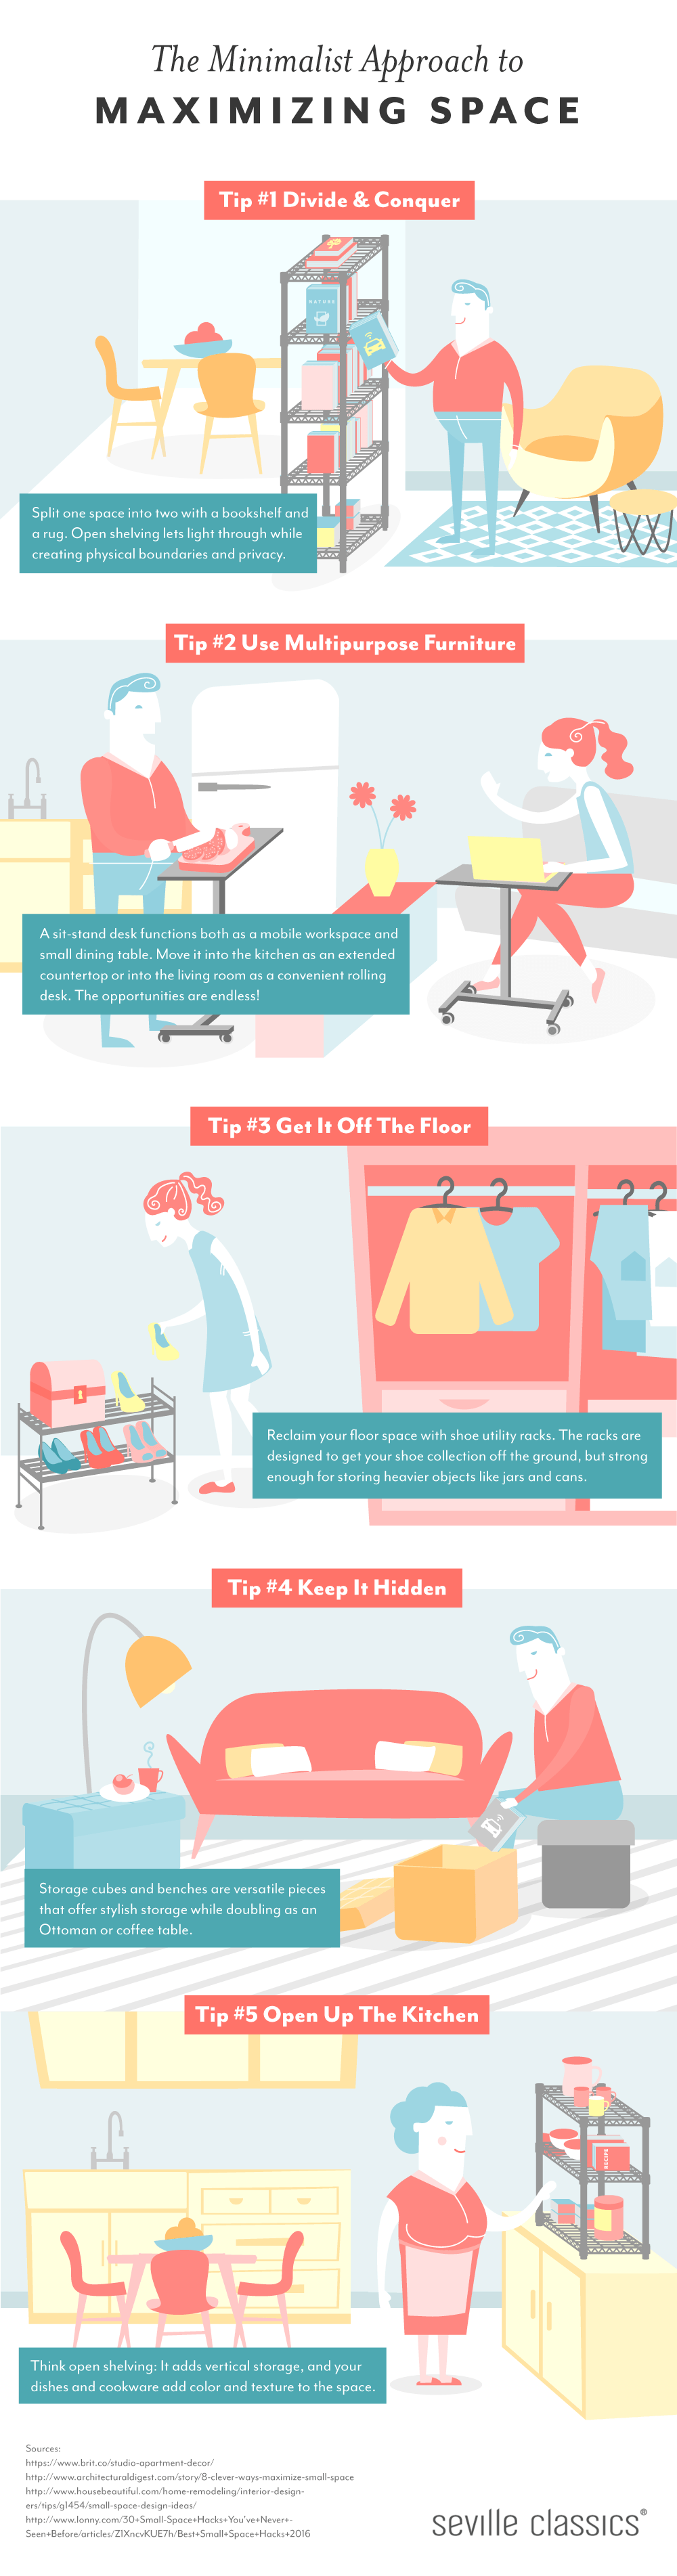 The Minimalist Approach to Maximizing Space Infographic